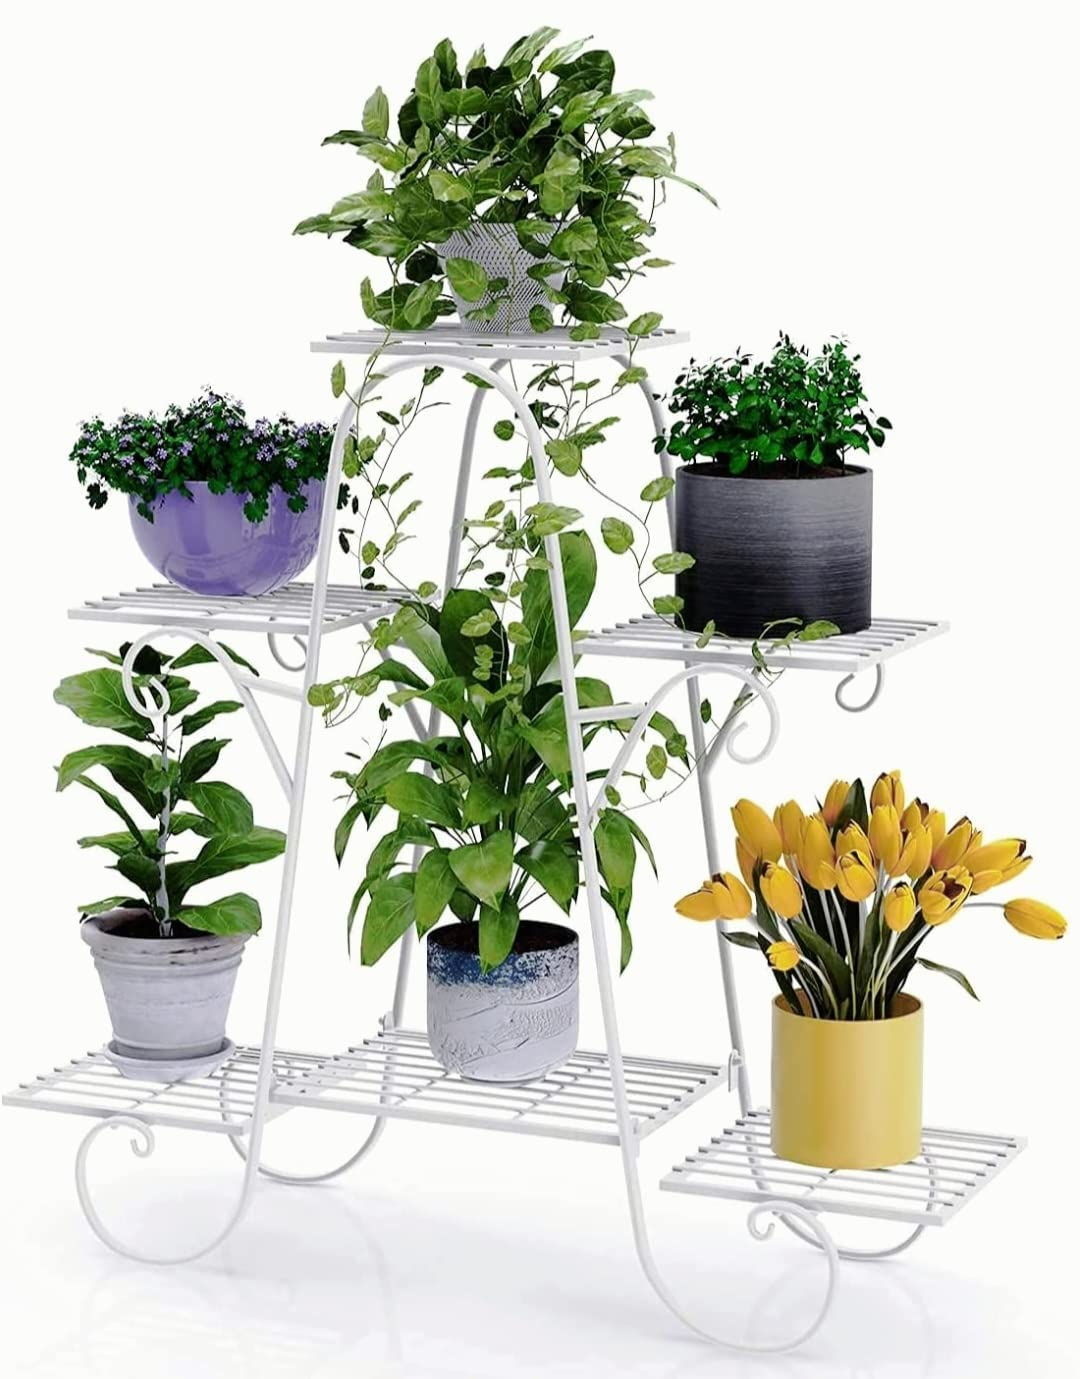 Bhulife 6 Tier Plant Stands for Indoors and Outdoors, Flower Pot Holder Shelf for Multi Plants